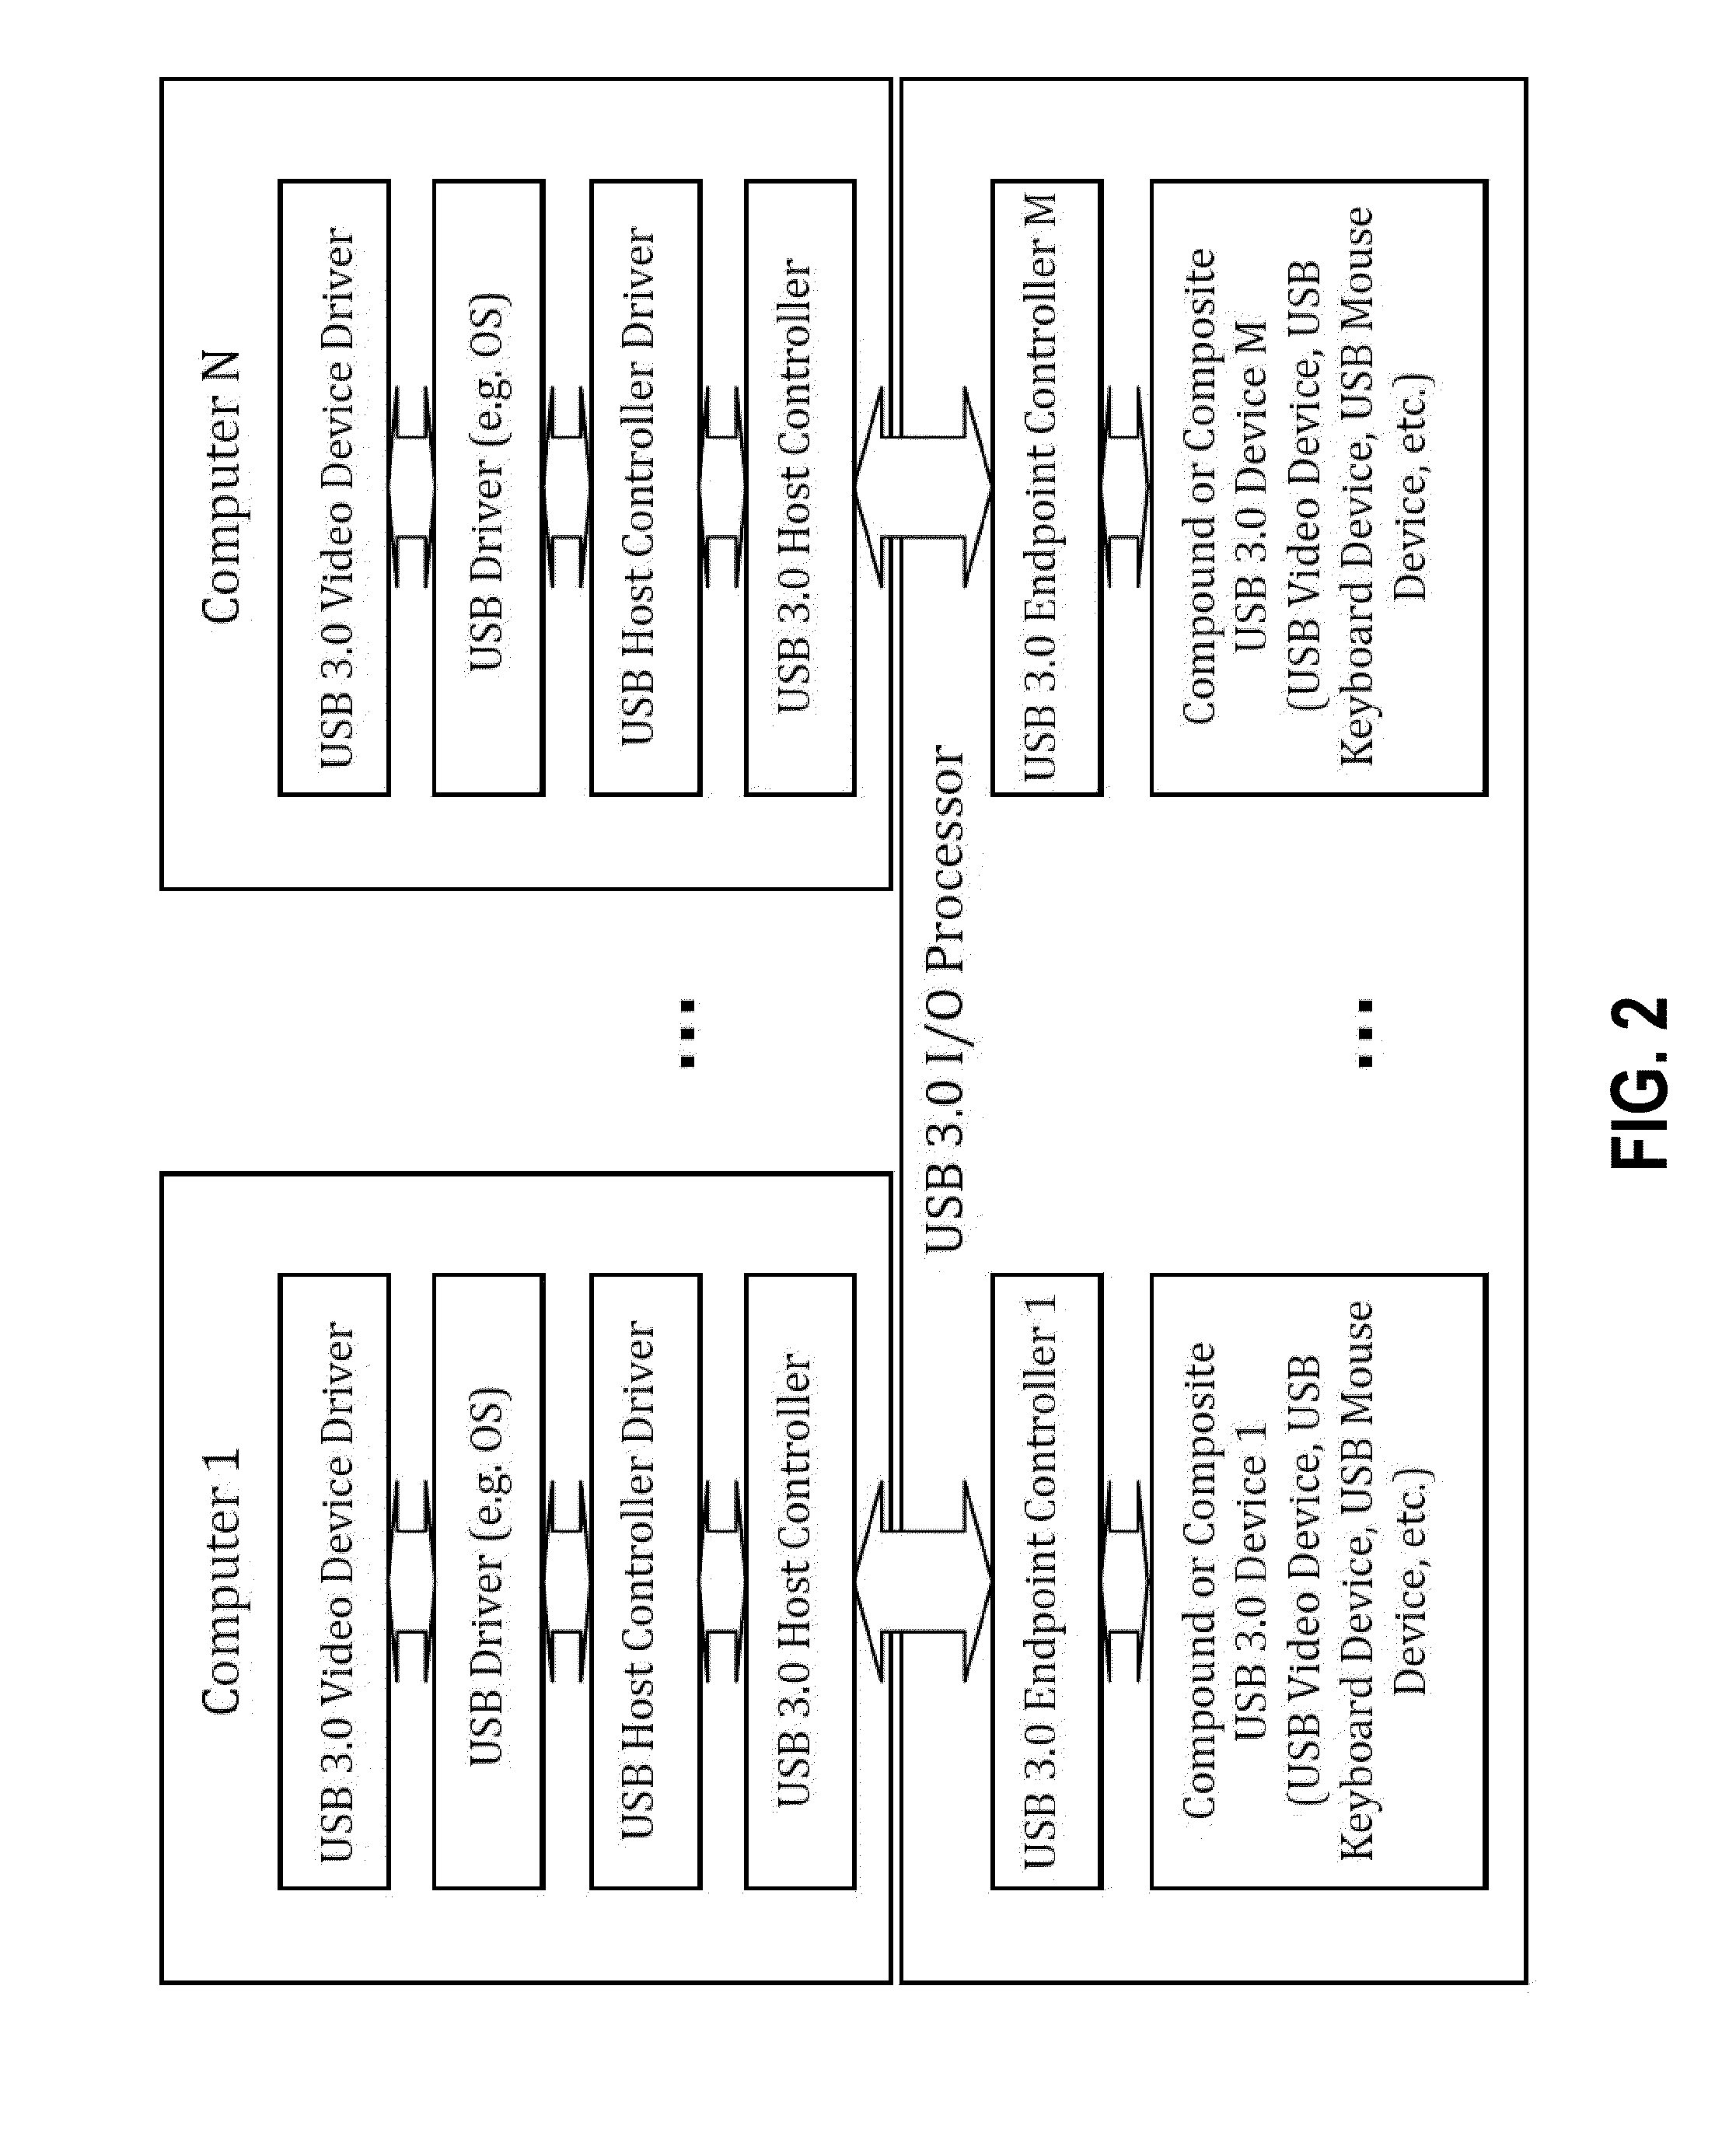 Method and Apparatus of USB 3.0 Based Computer, Console and Peripheral Sharing